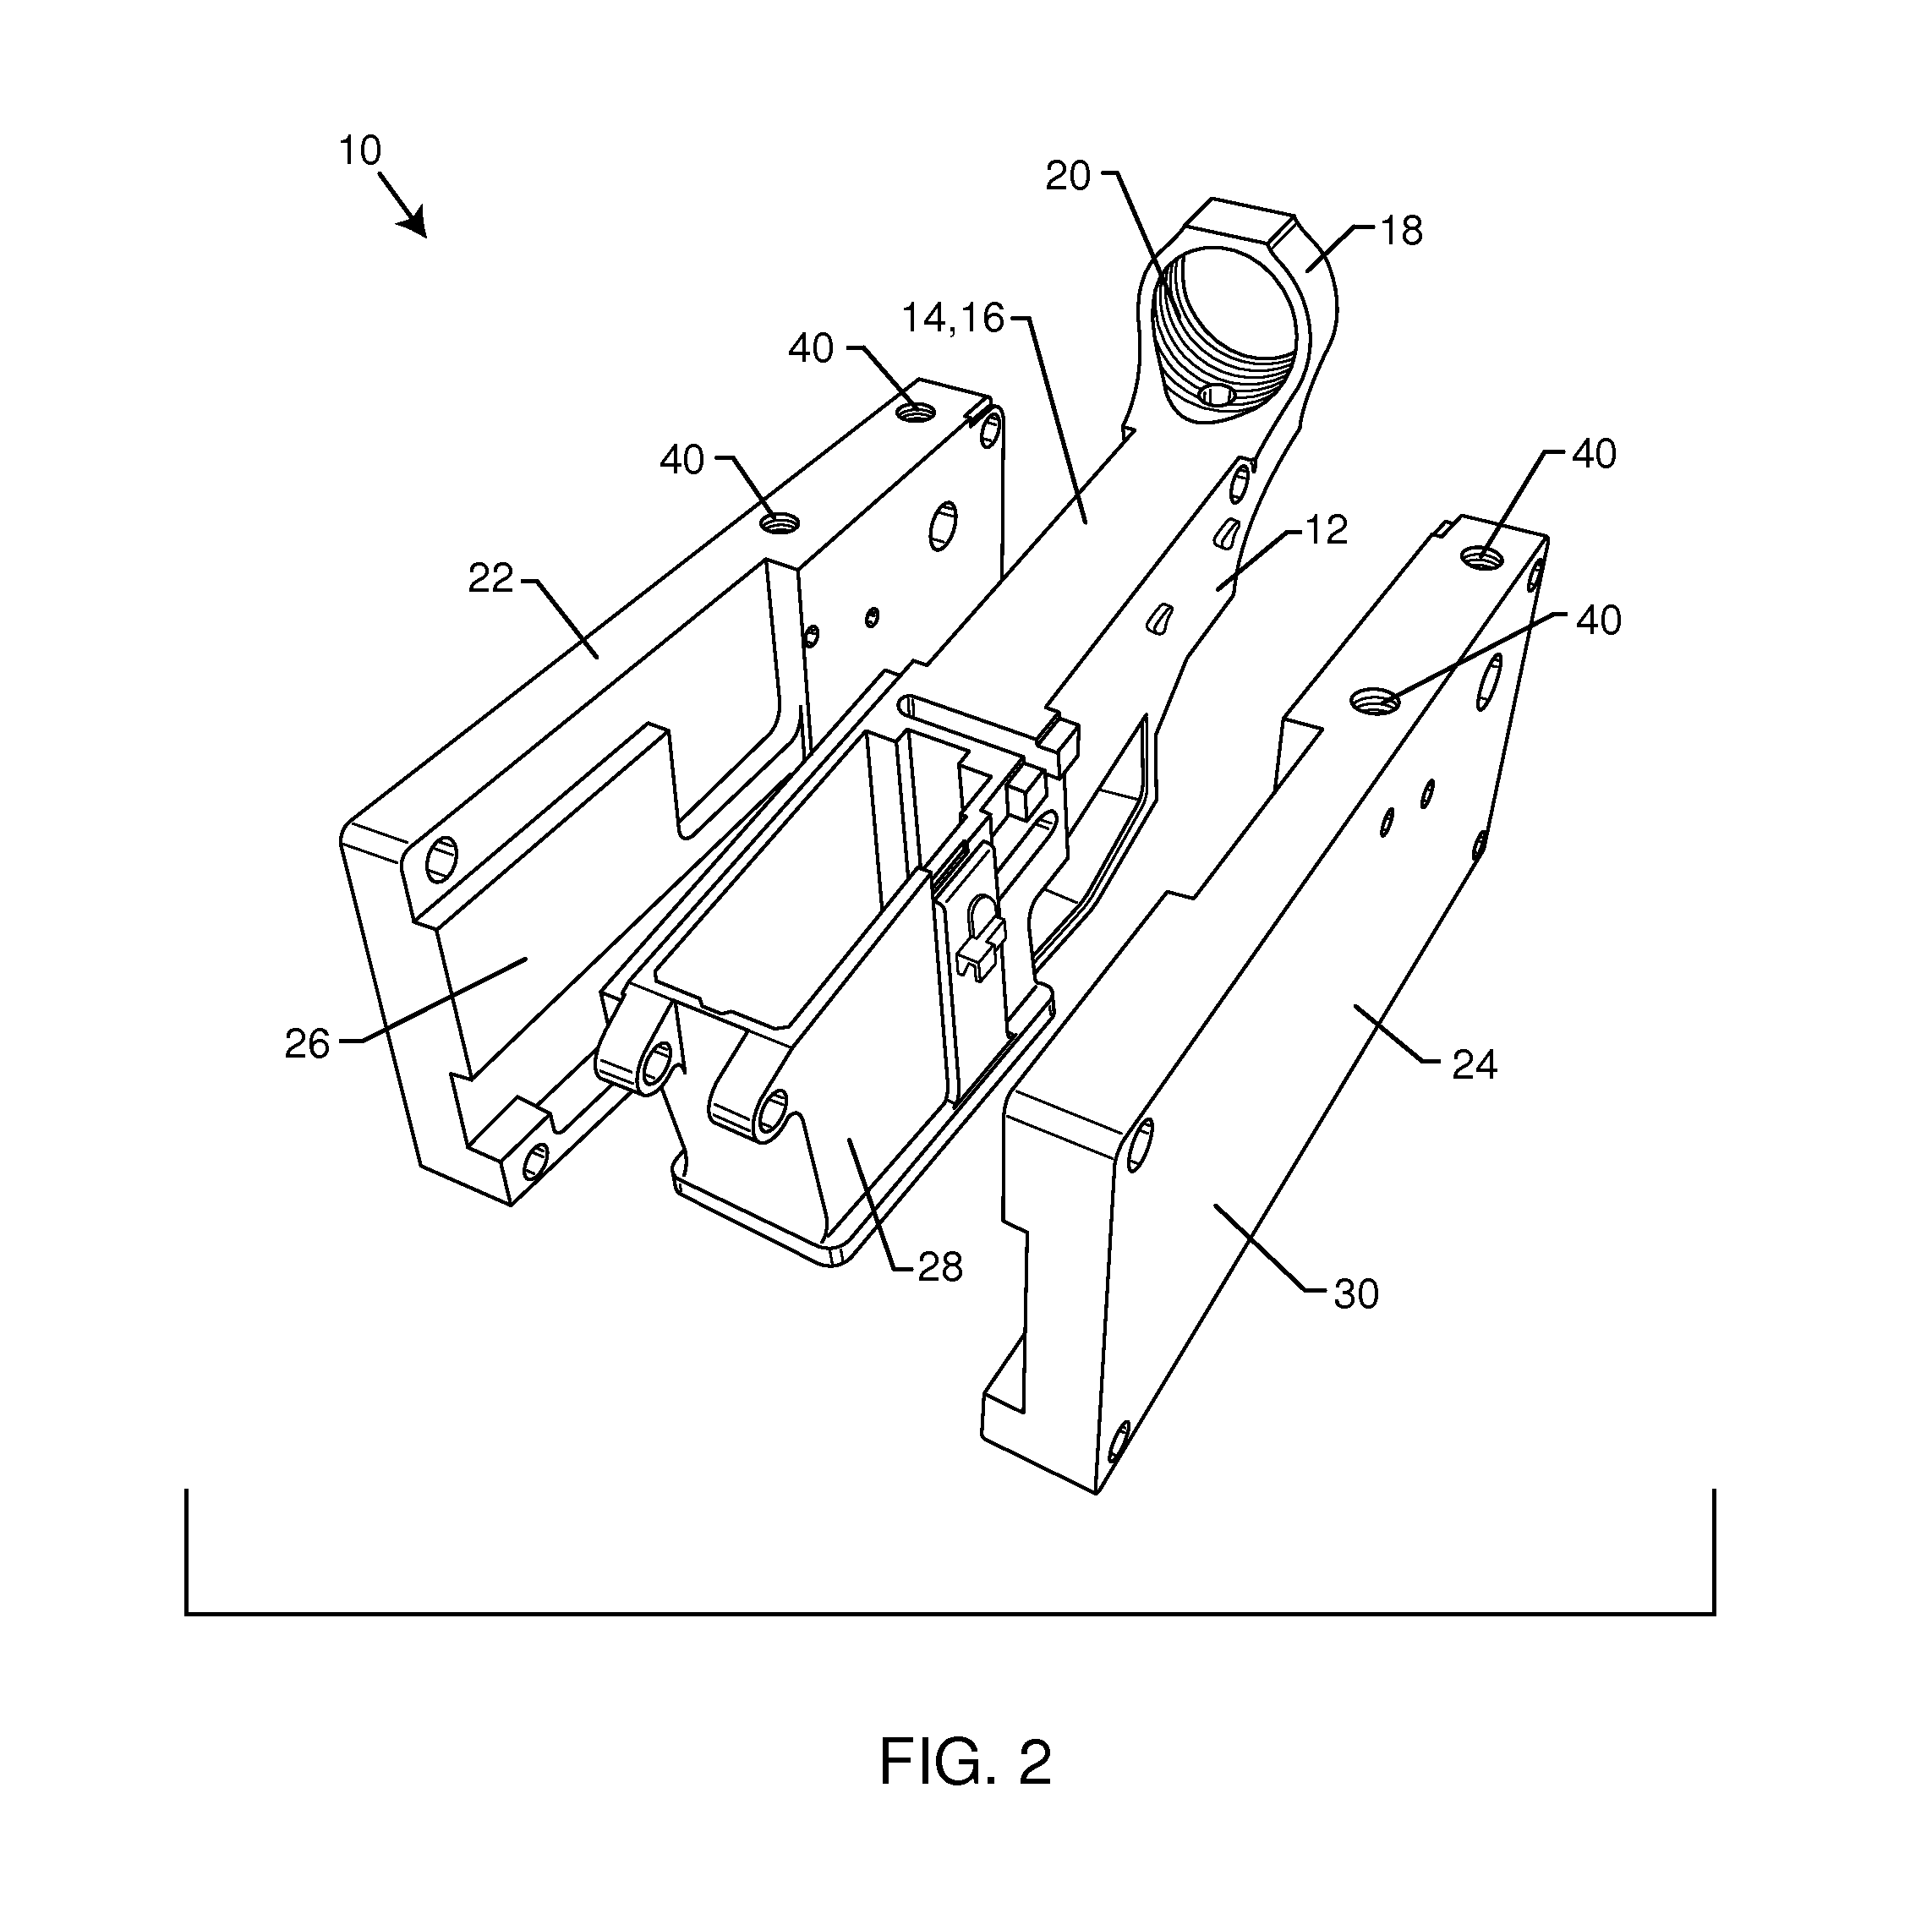 Jig for firearm lower receiver manufacture